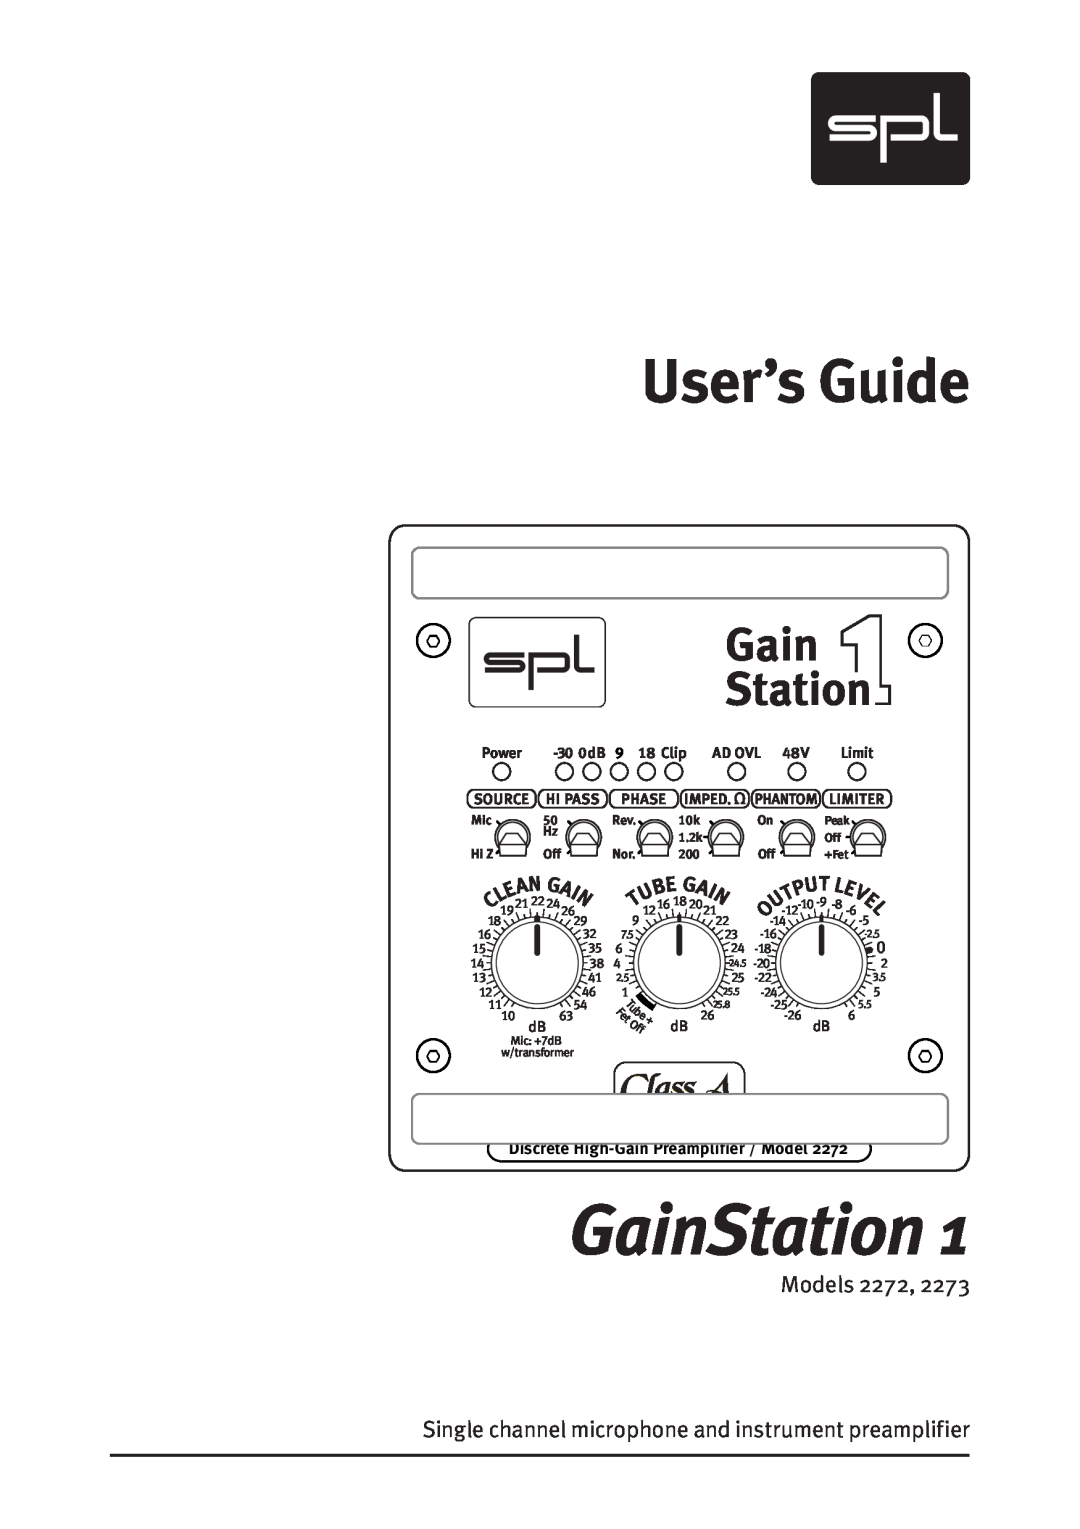 Sound Performance Lab 2272 manual GainStation, User’s Guide, Gain Station, Class A, Be G, Power, Clip, Ad Ovl, Hi Pass 